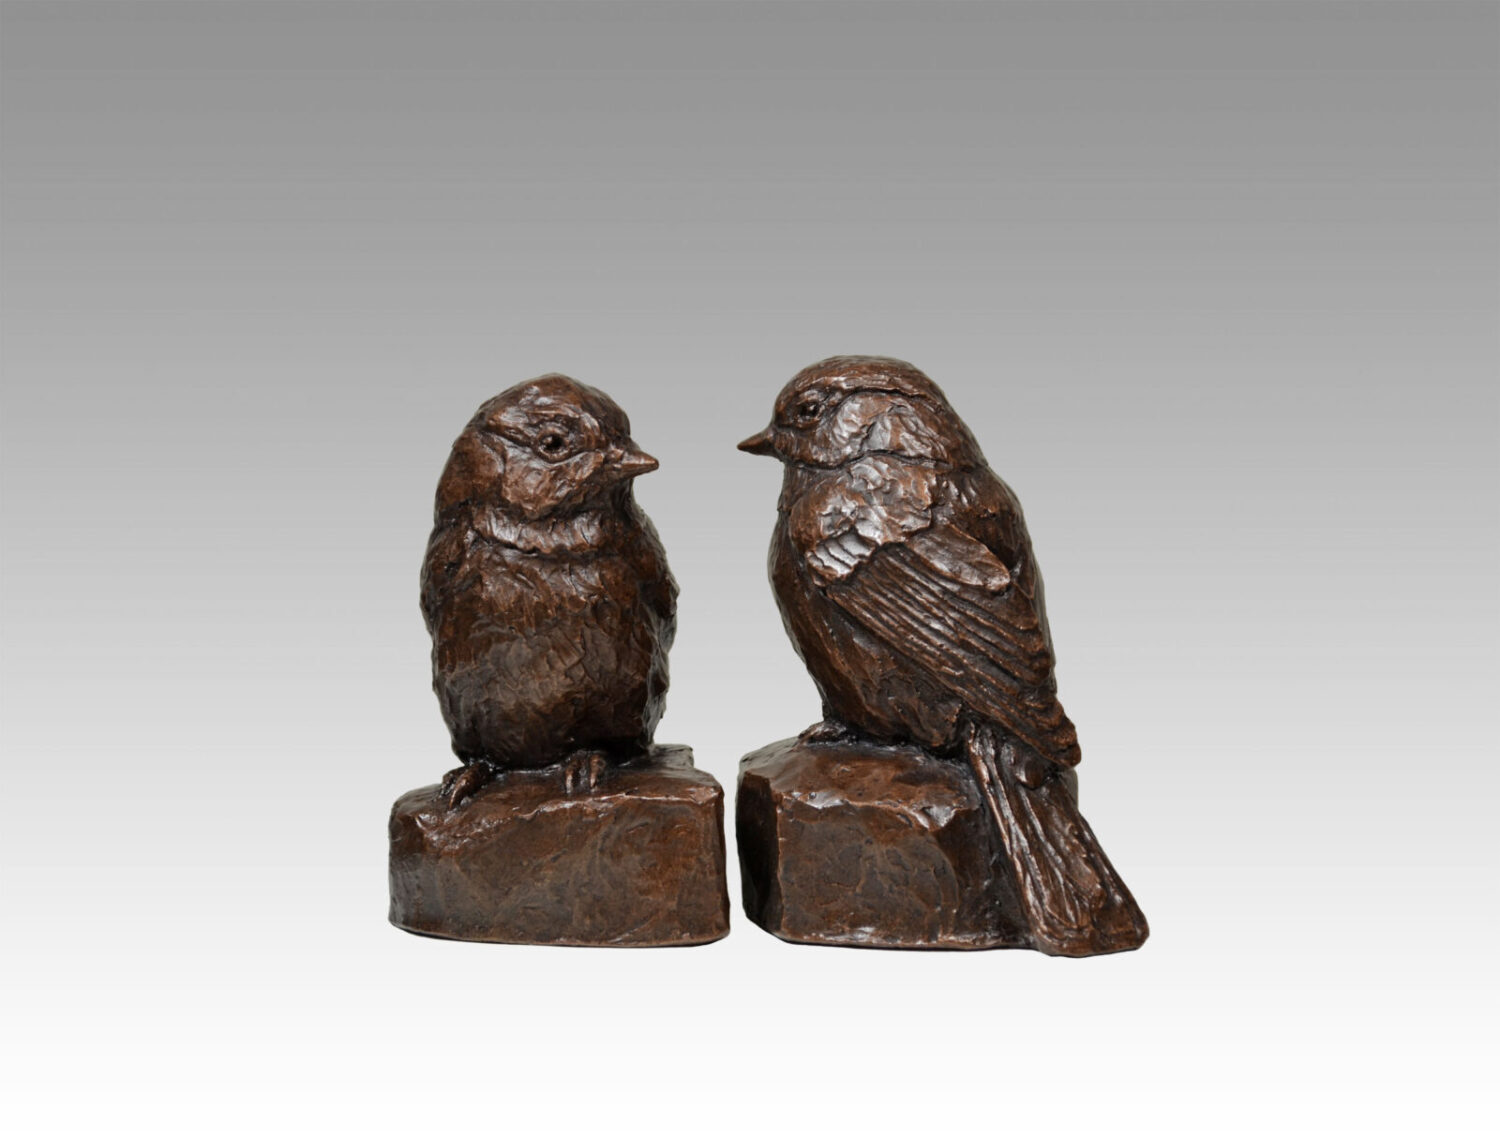 Gallery, Winter Friendship, $150 CAD, Metal Infused, 4” H, Edition 30, sold as a pair, Wildlife Sculpture of two Black-capped chickadees, Sculptor Tyler Fauvelle